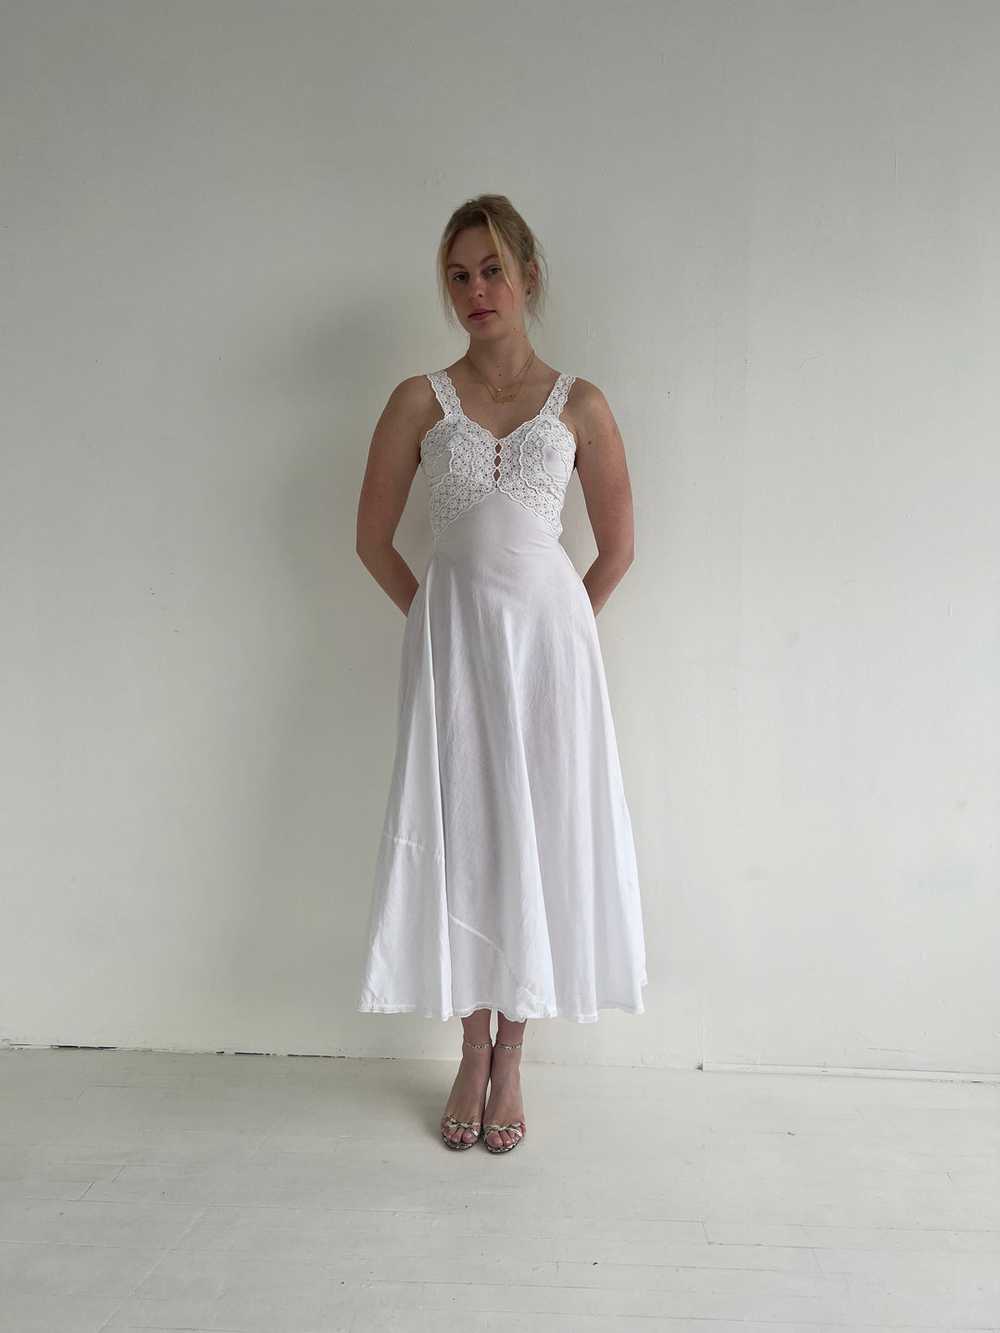 1970's Bridal White Cotton Dress with Lace - image 2